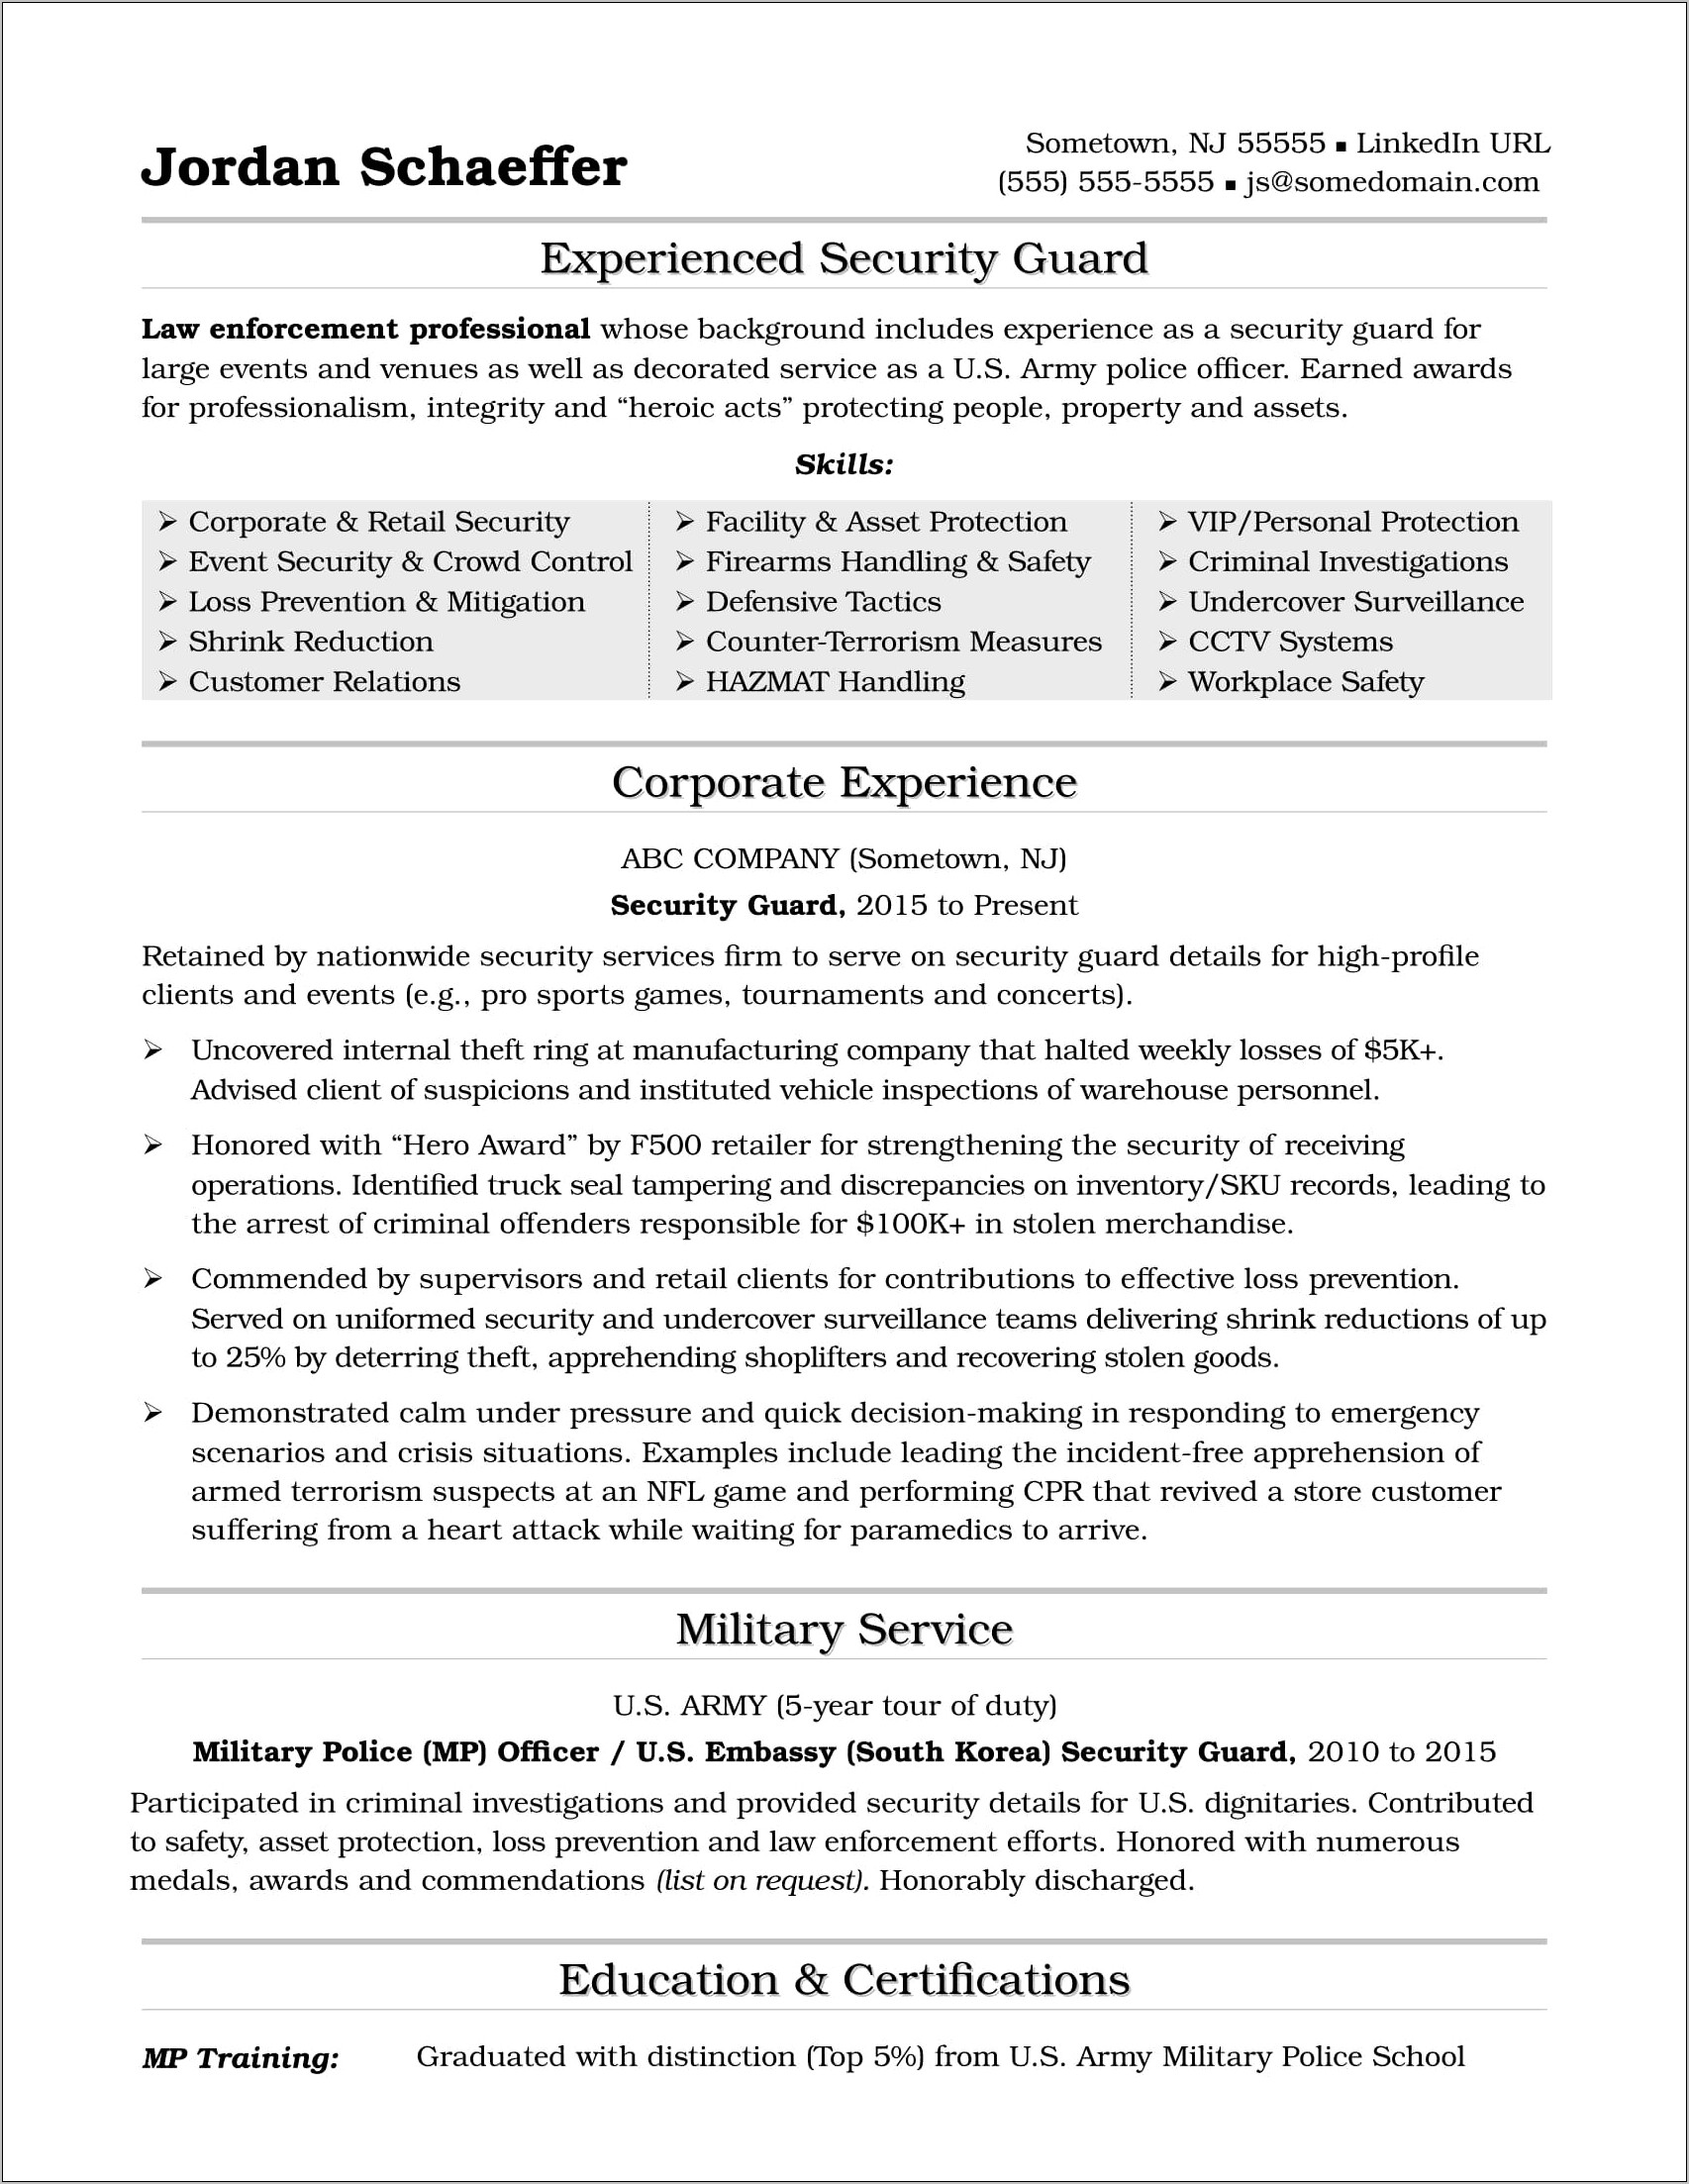 Skills And Certifications Police Officer Resume